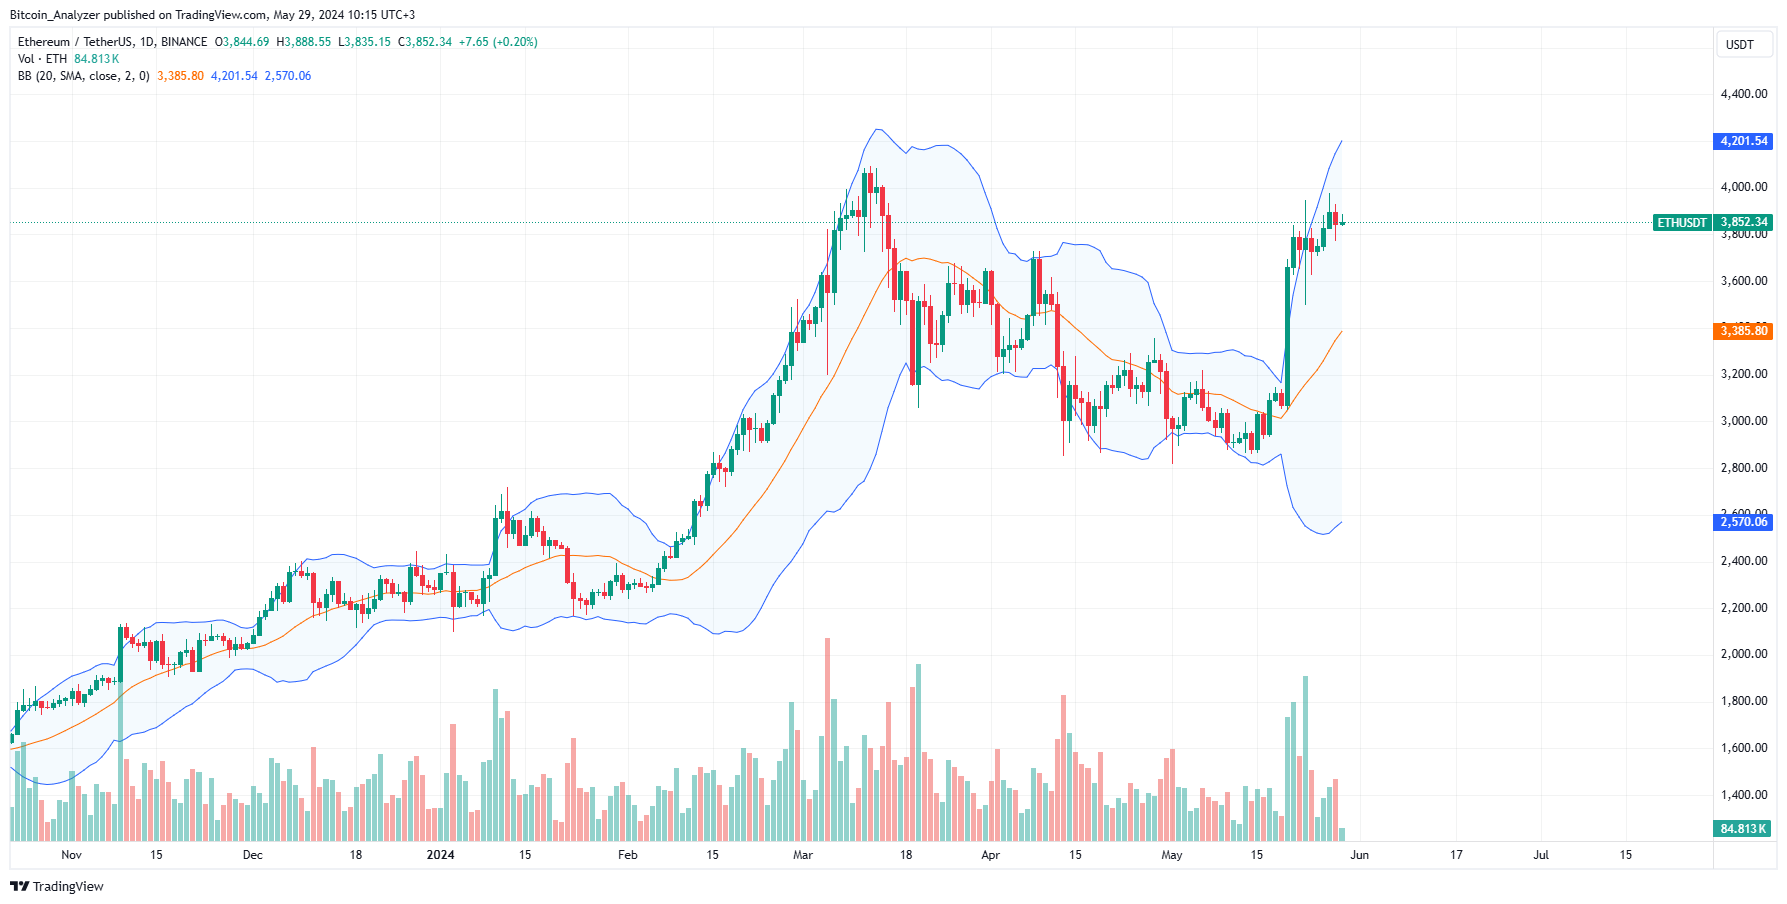 Ethereum daily chart for May 29